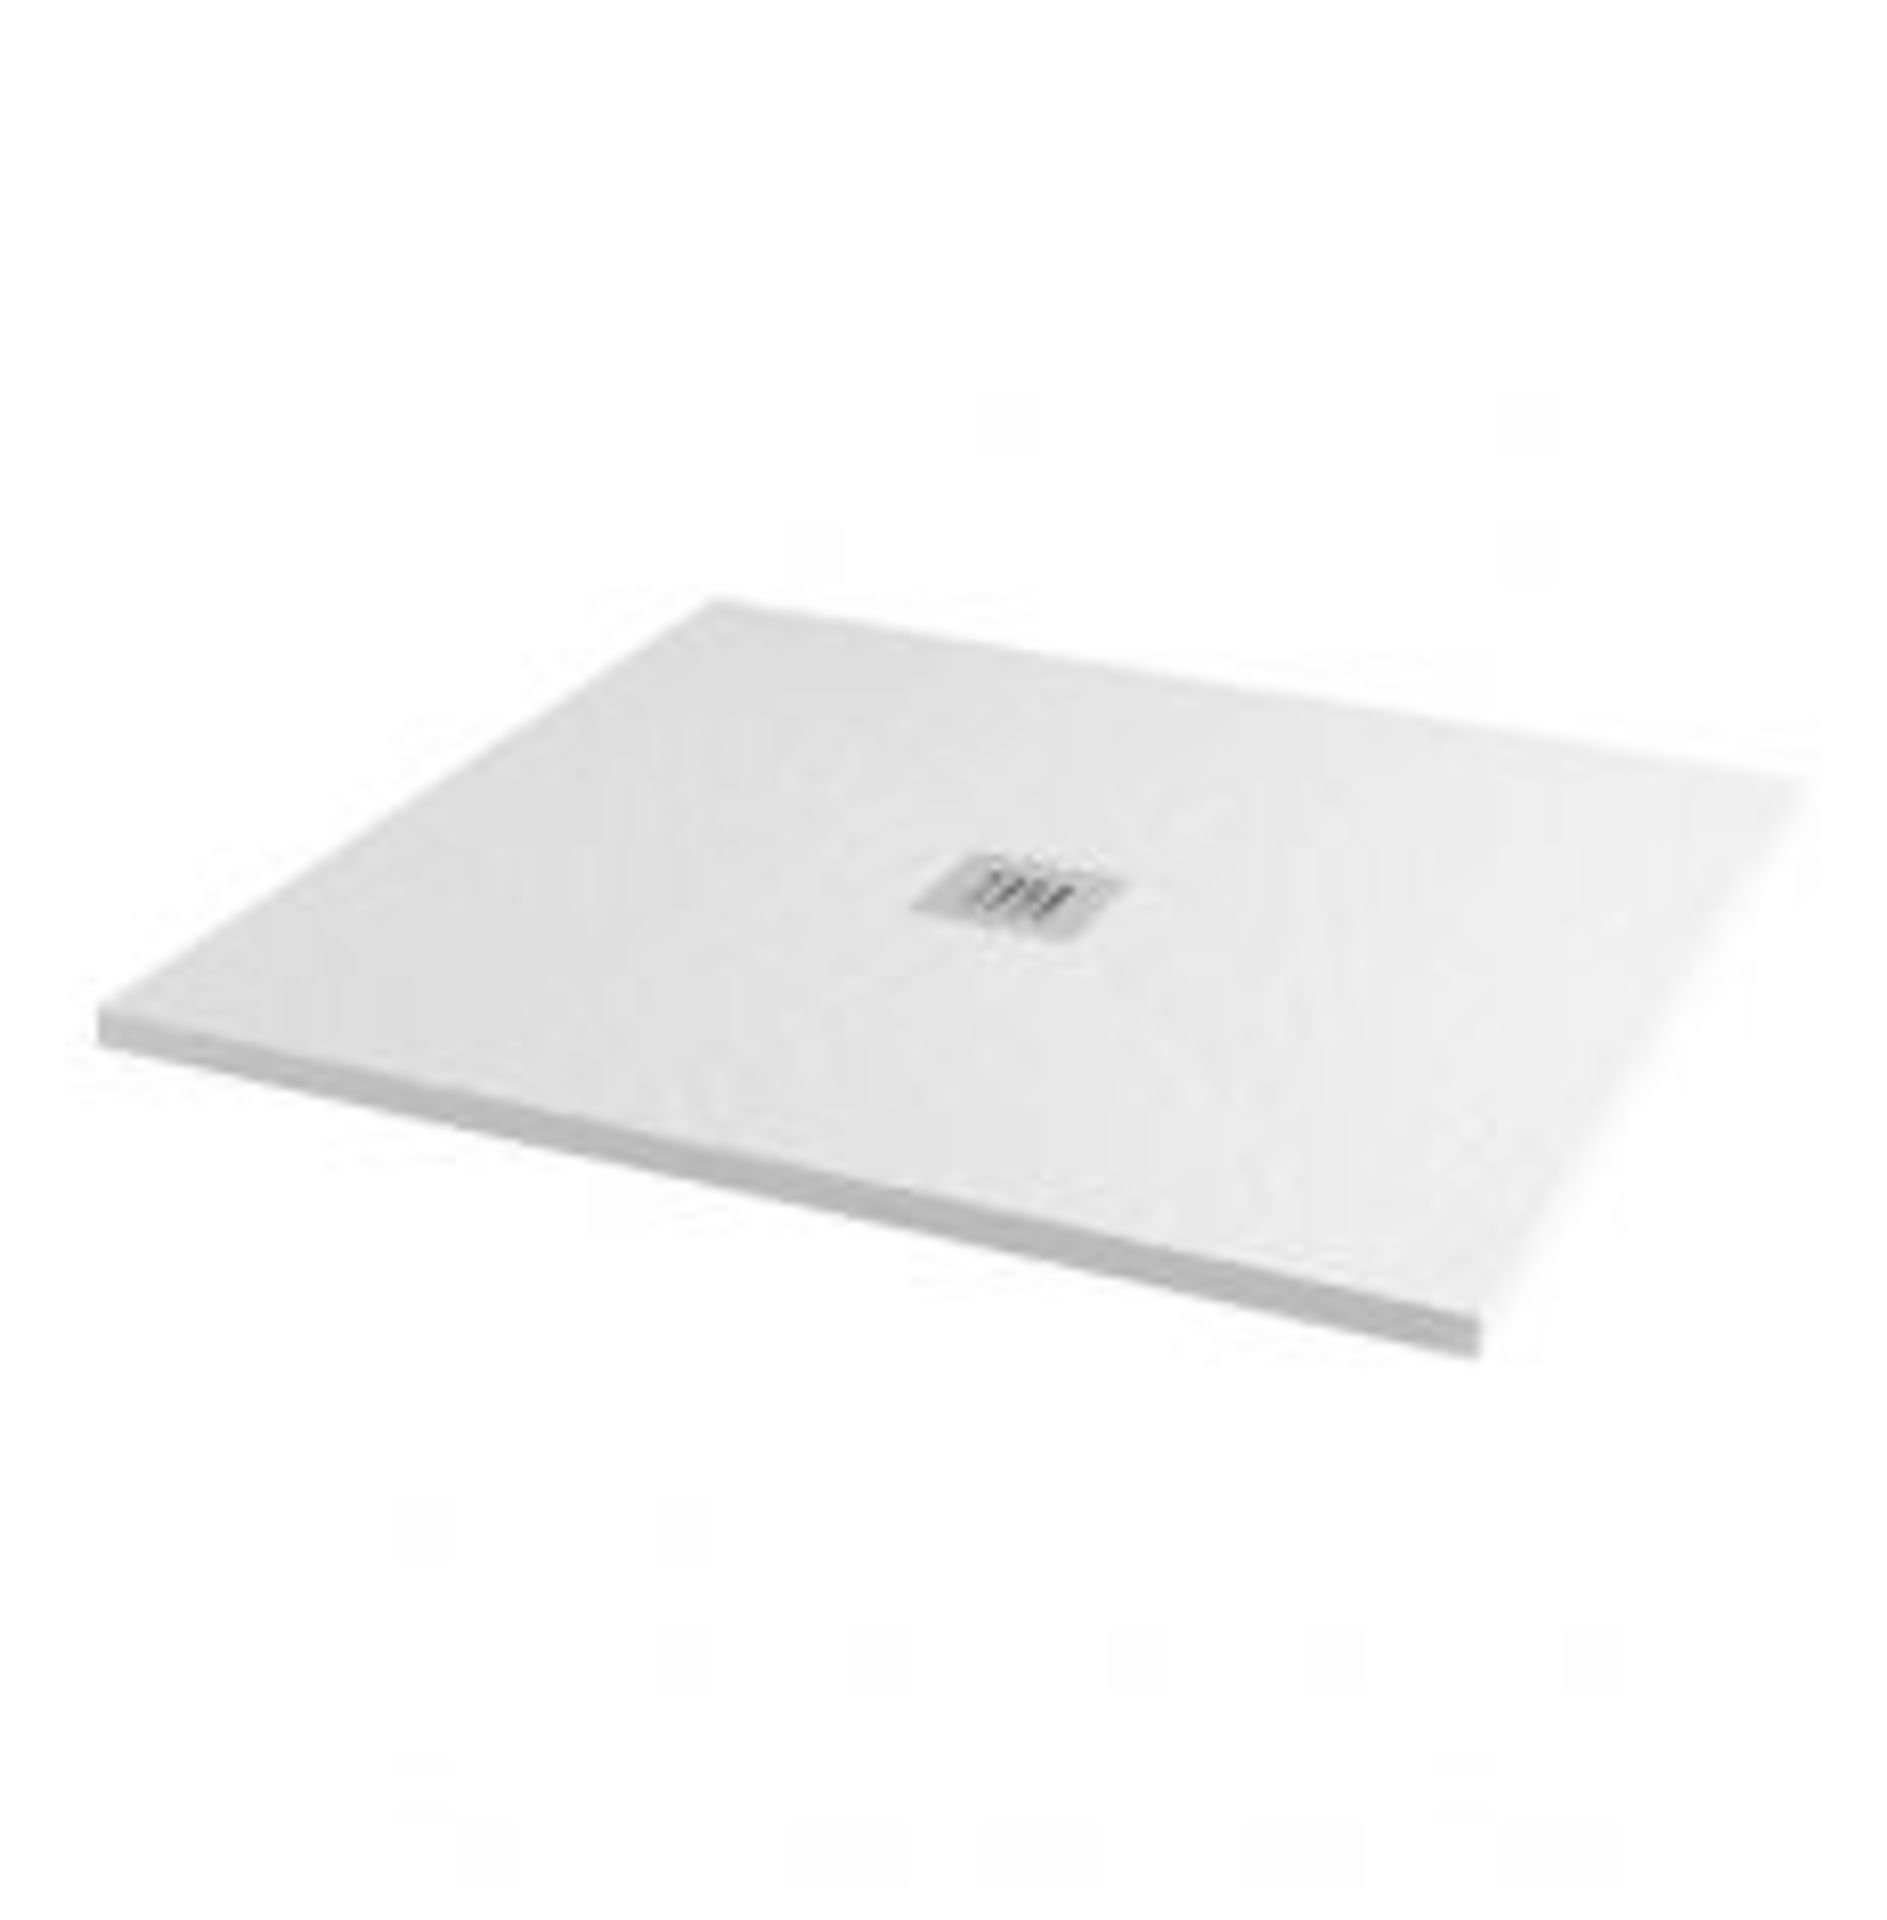 NEW 900x900mm Square White Slate Effect Shower Tray & Chrome Waste.Handcrafted from high-grade ... - Image 2 of 2